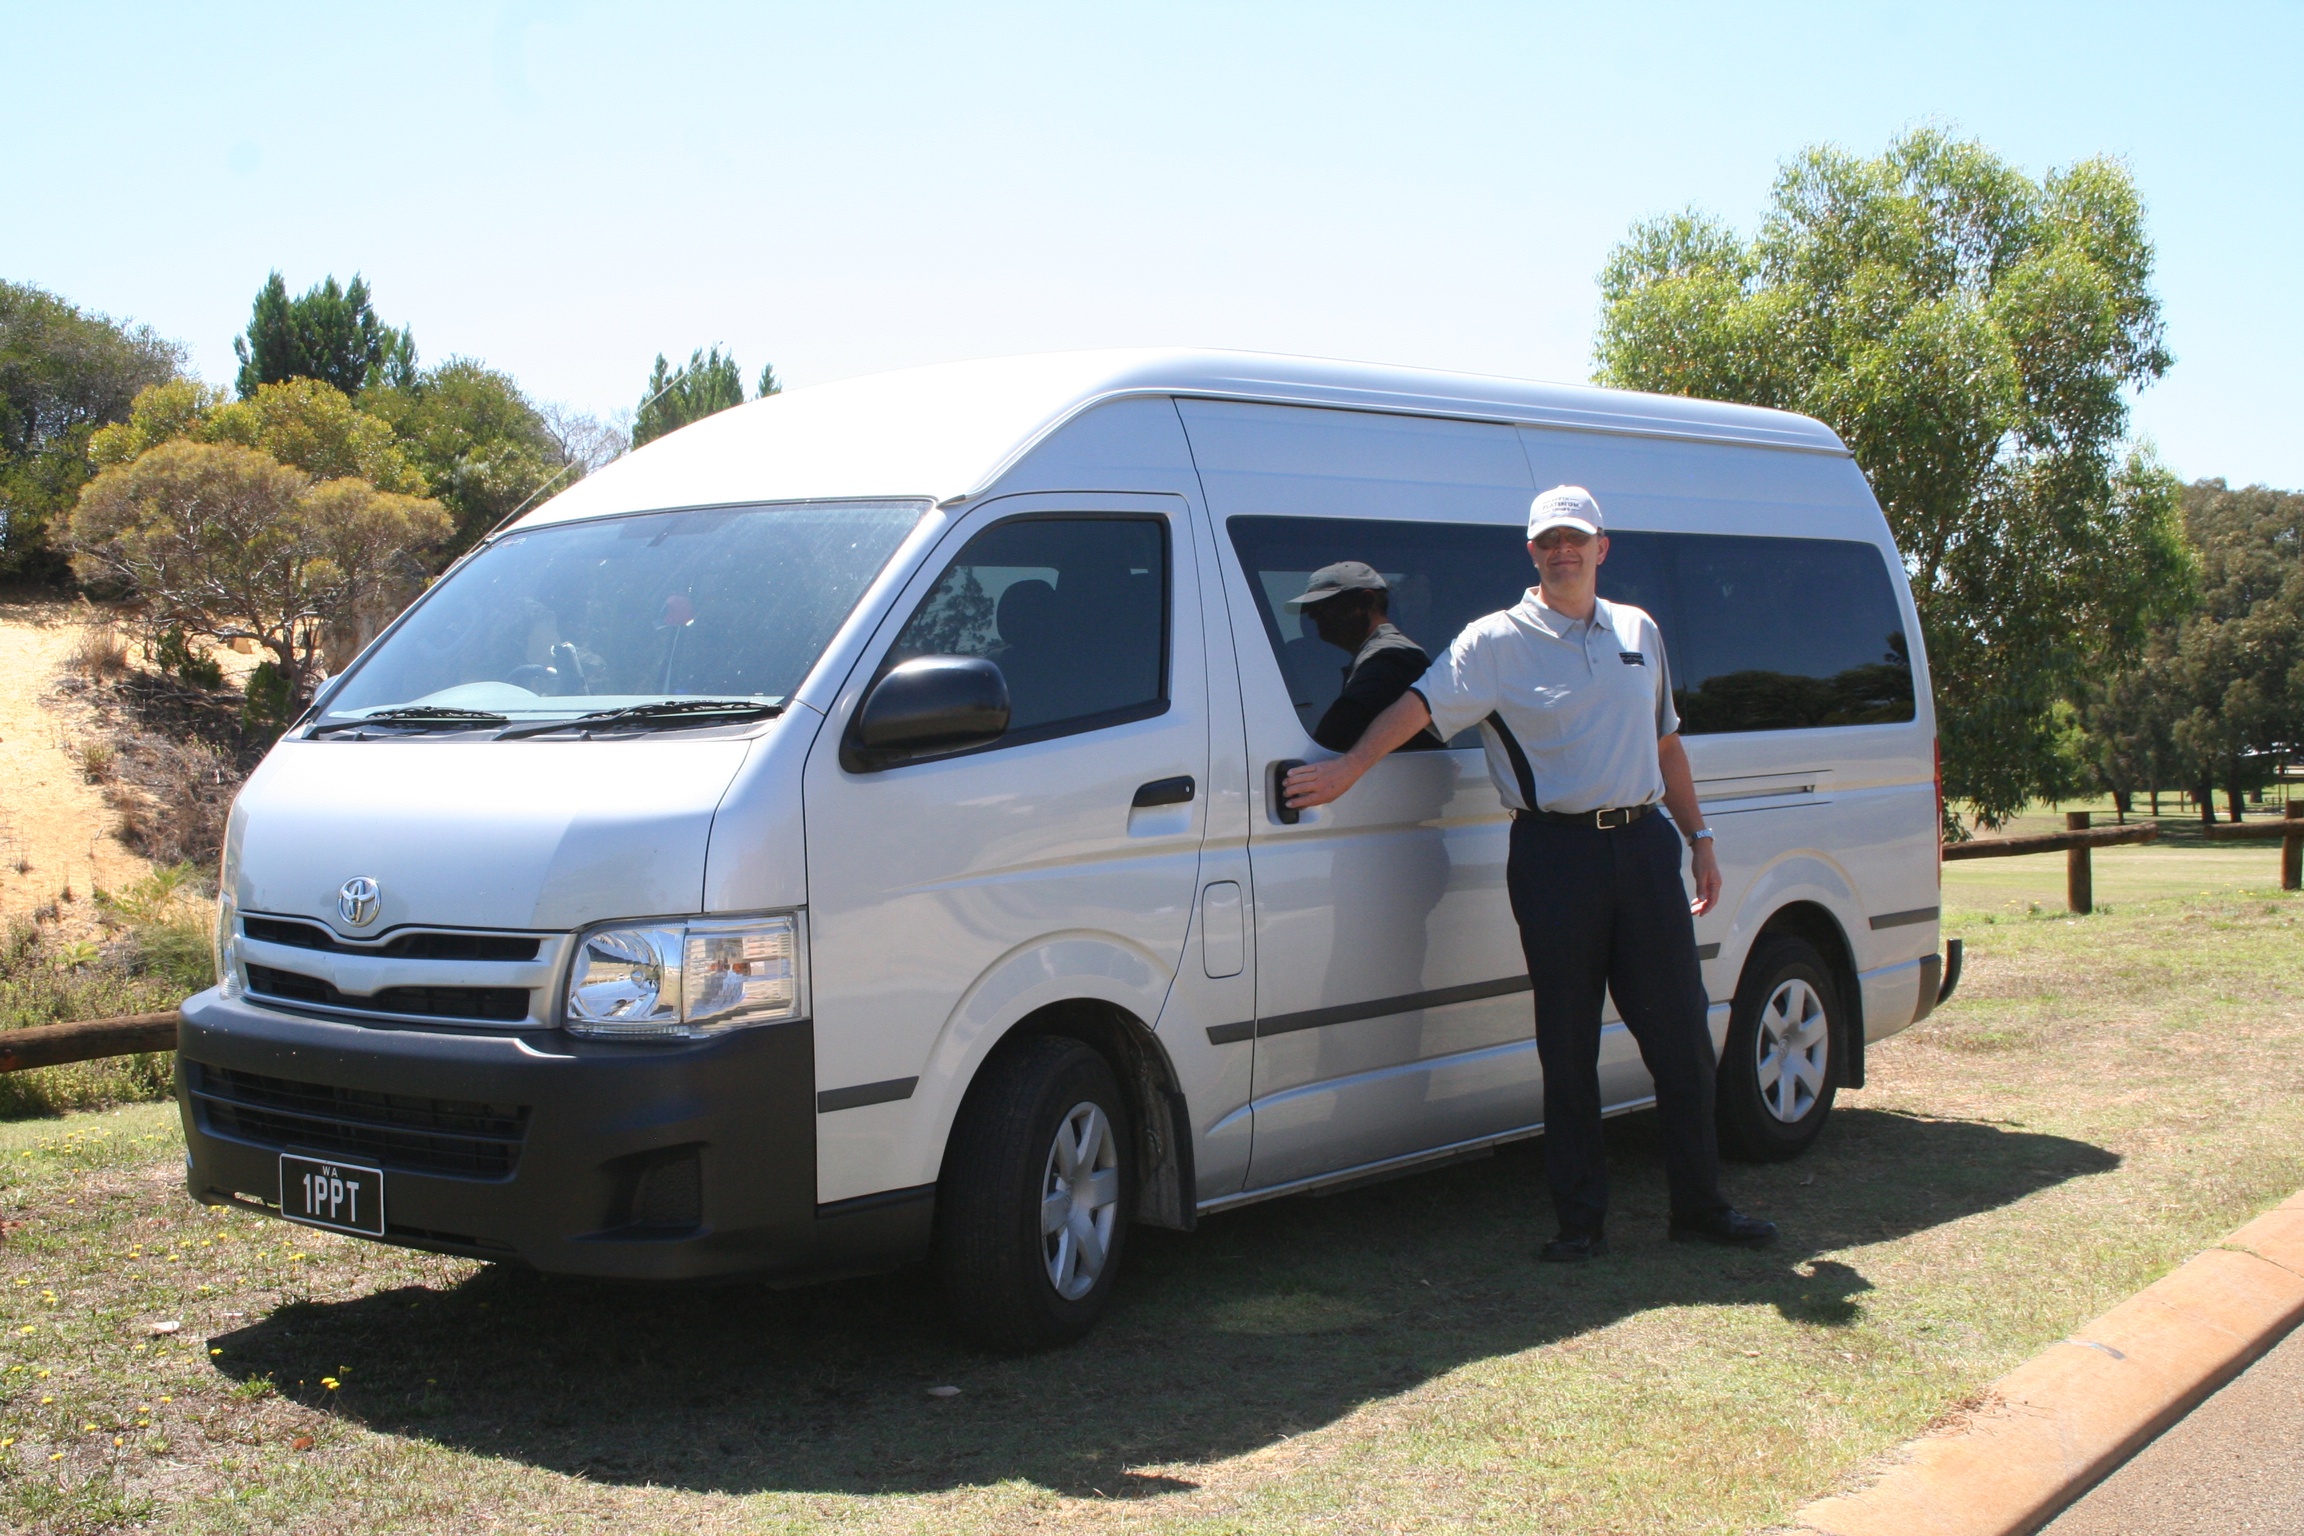 Hire our Modern 13 seater minibus and driver for the day-sit back and relax and let us do the driving